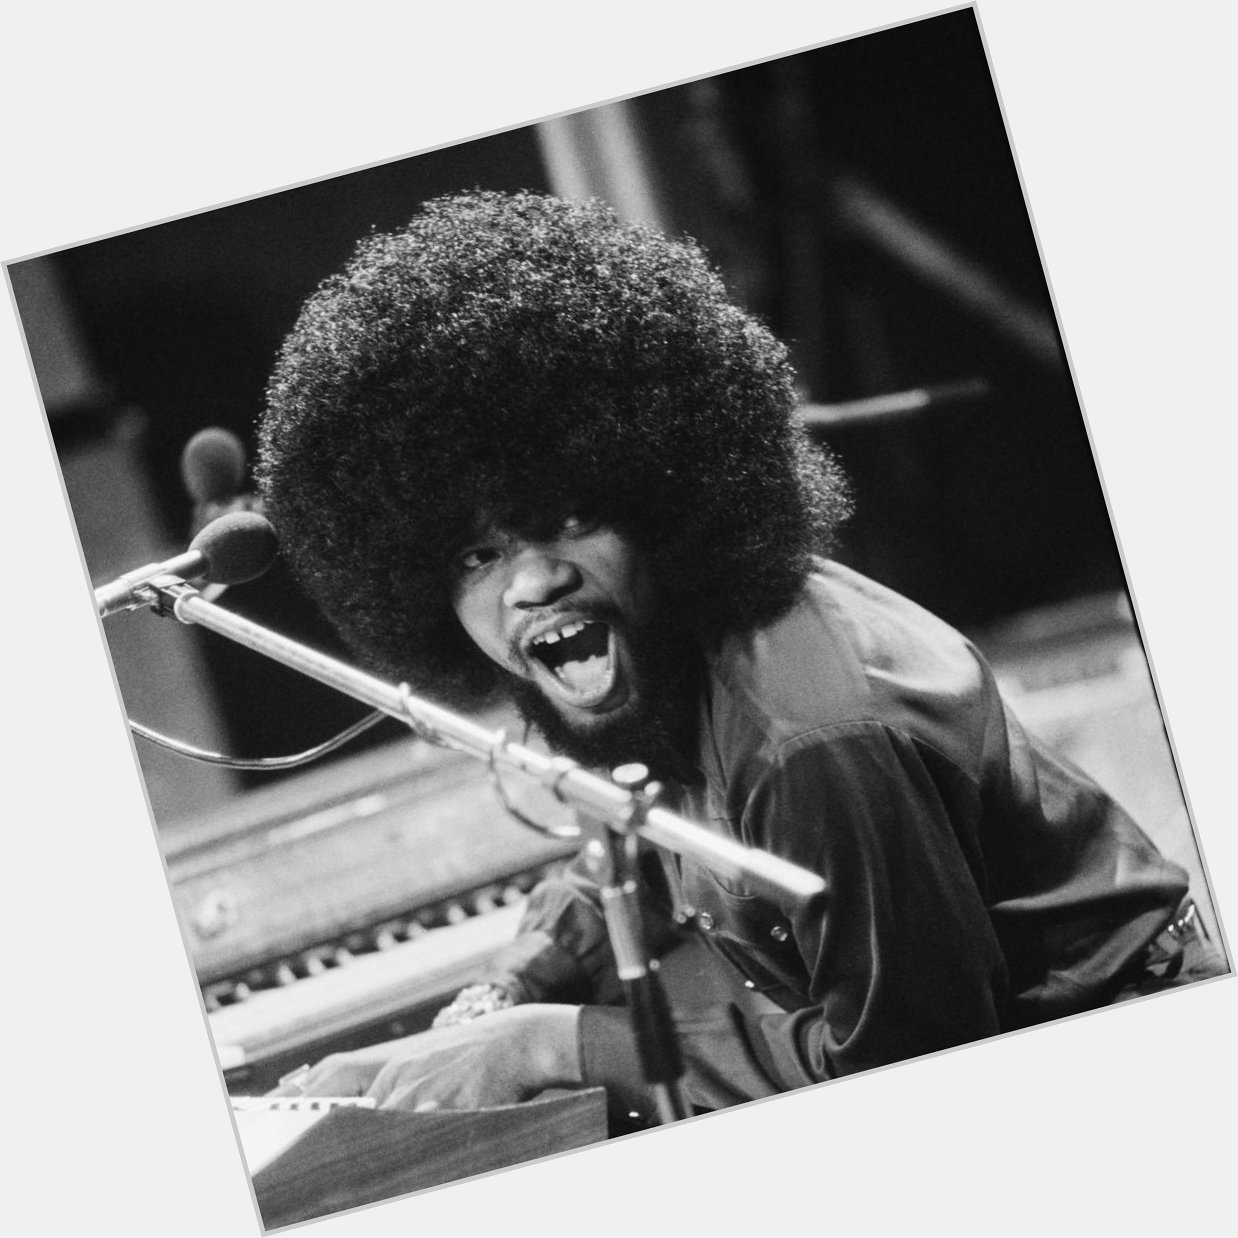 Happy birthday to the one & only Billy Preston - RIP in R&R heaven!  